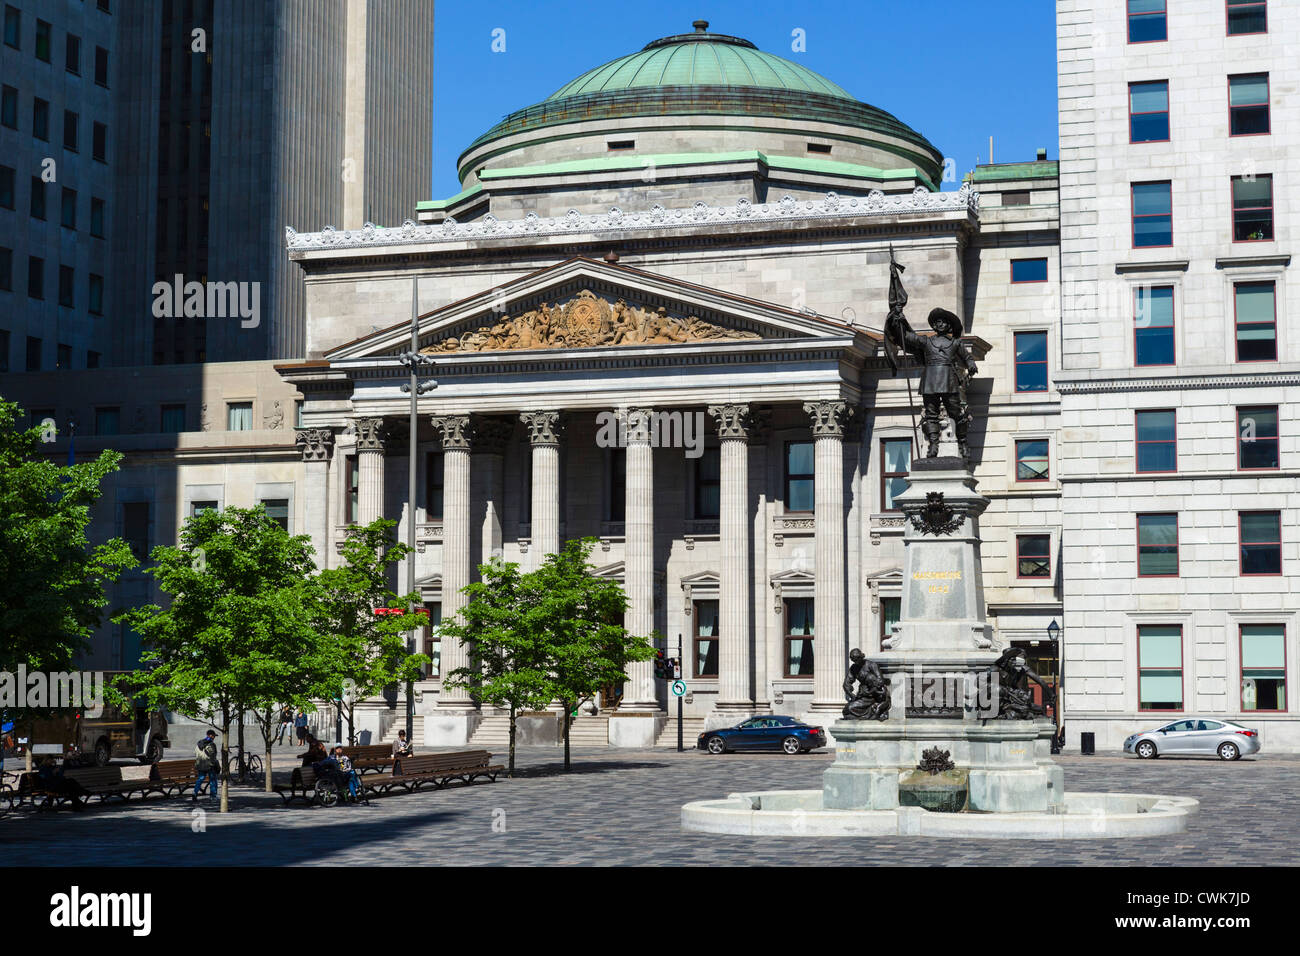 The Bank of Montreal building on the Place d'Armes, Rue Saint-Jacques, Vieux Montreal, Quebec, Canada Stock Photo